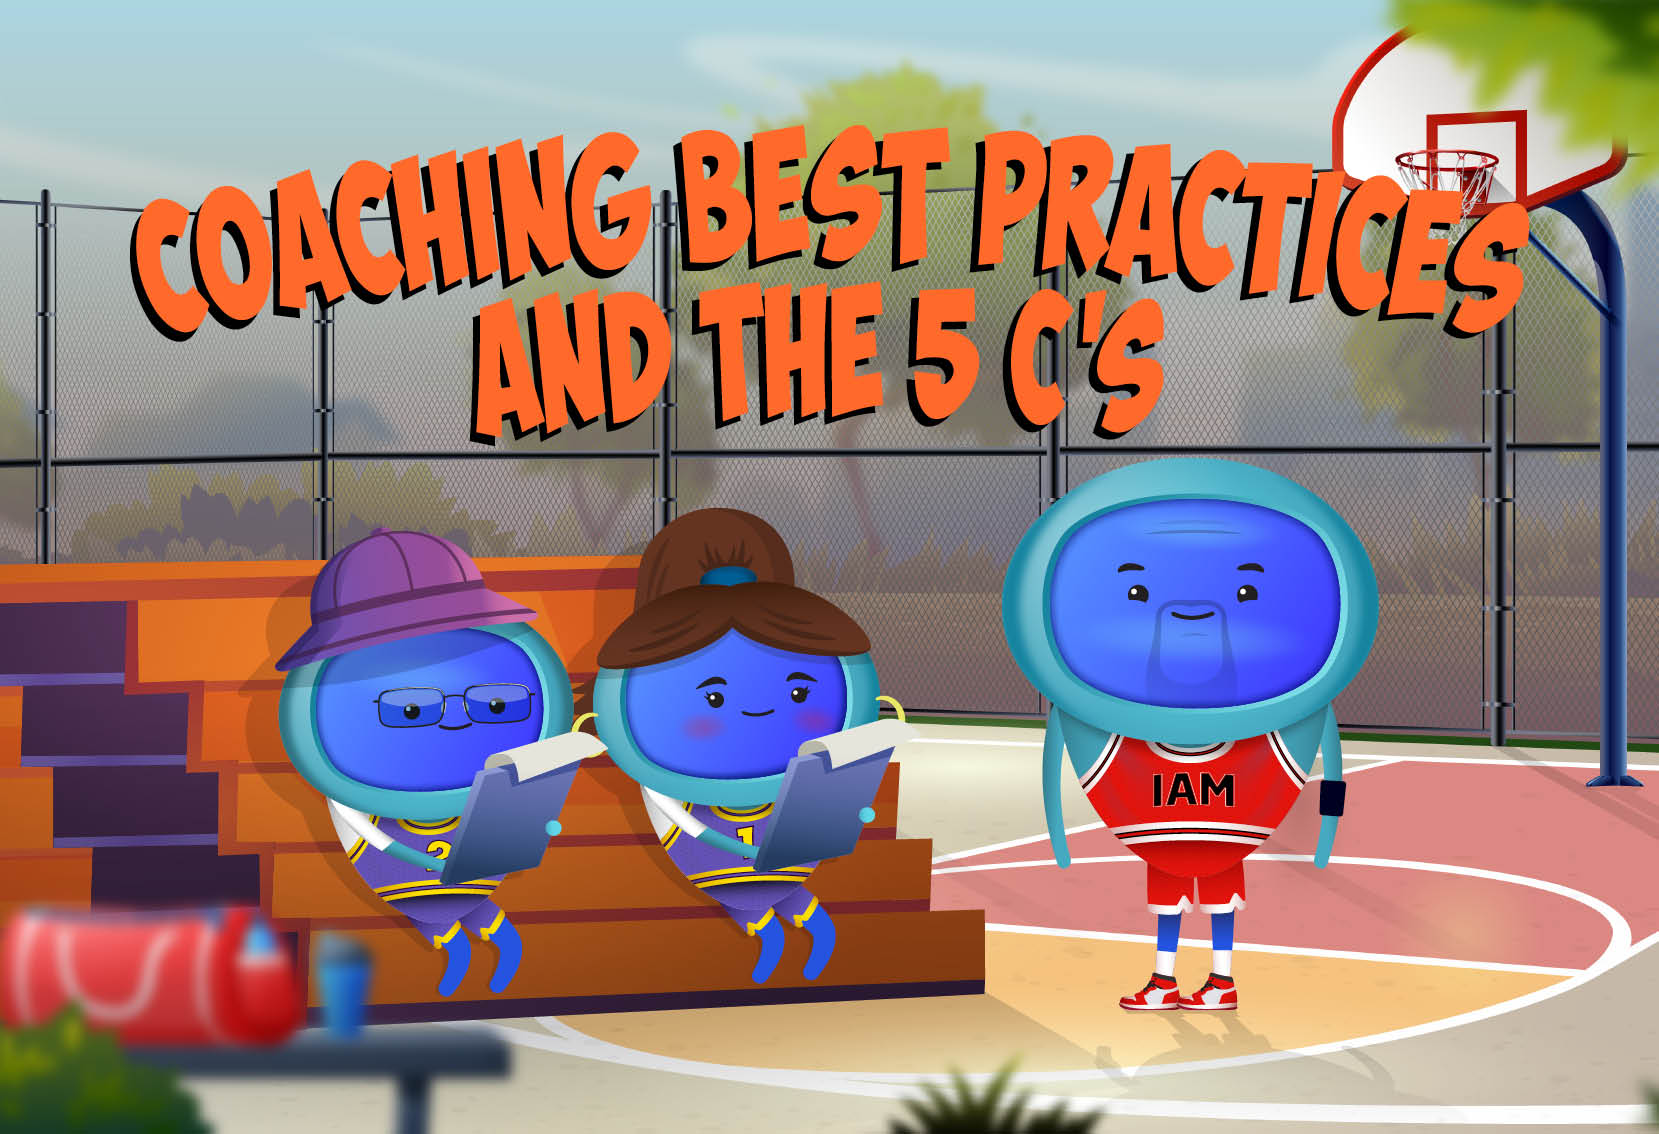 iAM 00345 - Coaching Best Practices and the 5Cs - LMS Thumbnail (1)